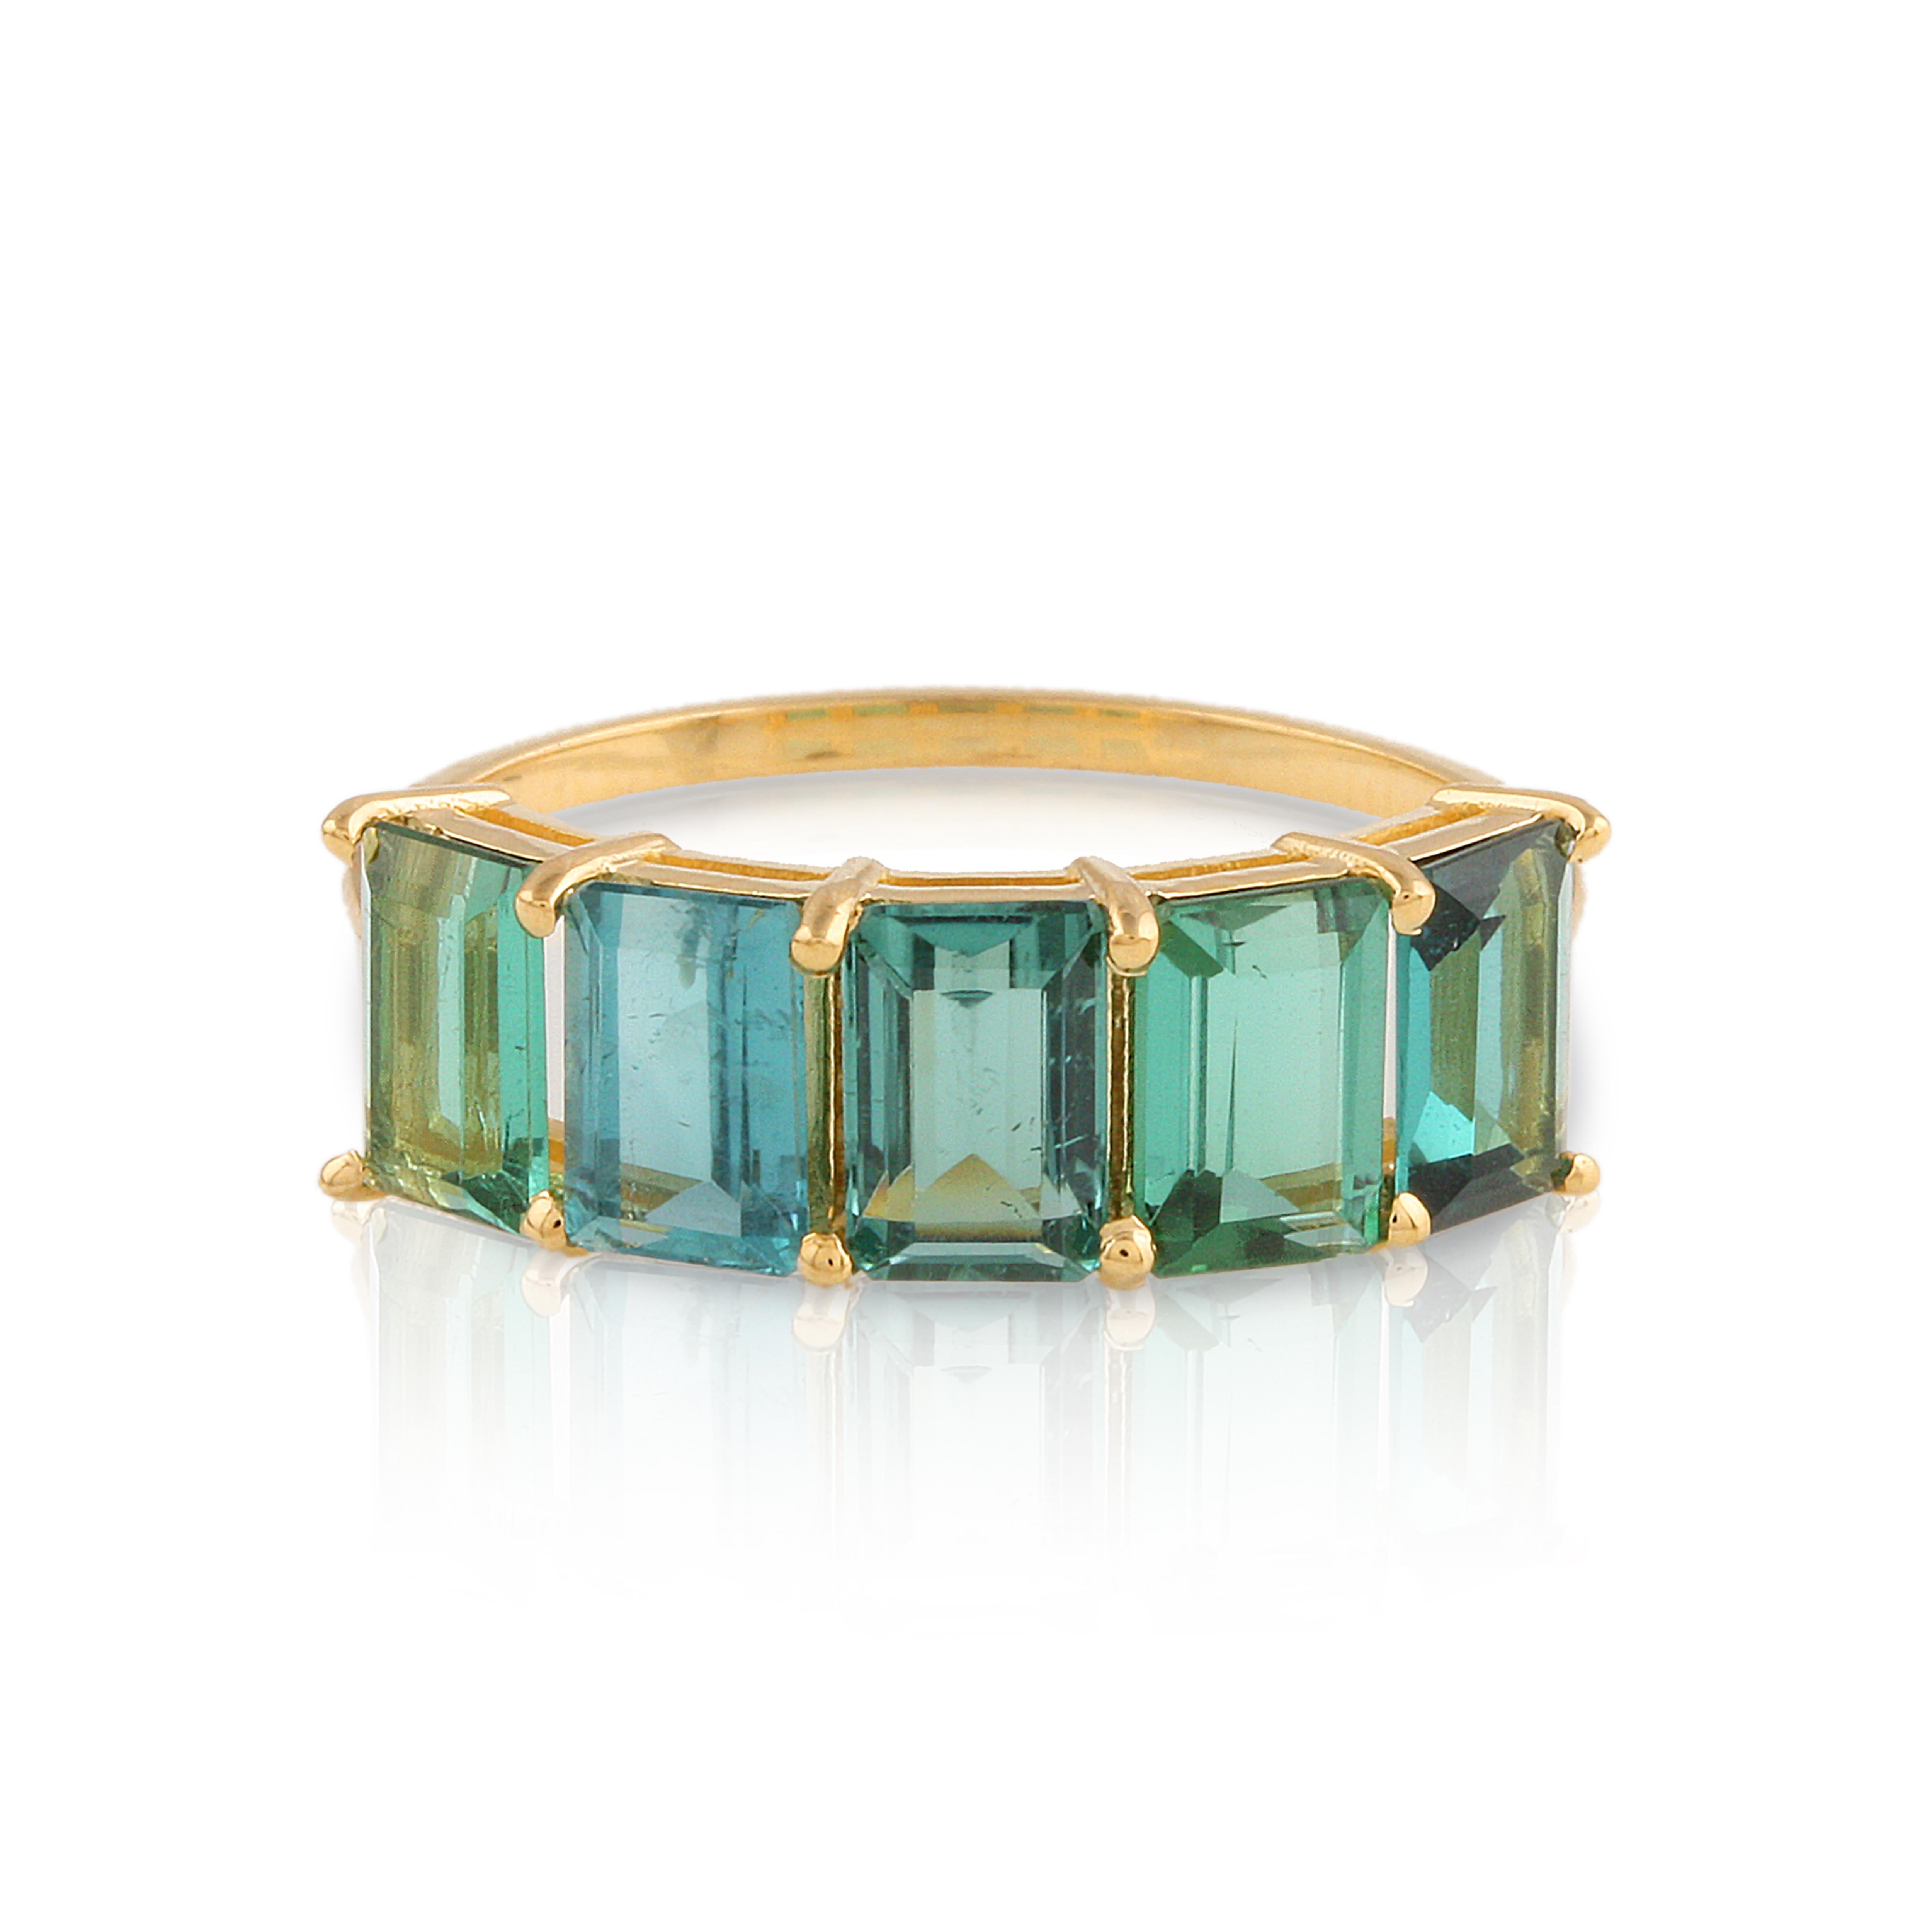 Tresor Beautiful Ring feature 2.55 carats of Green Tourmaline. The Ring are an ode to the luxurious yet classic beauty with sparkly gemstones and feminine hues. Their contemporary and modern design make them perfect and versatile to be worn at any